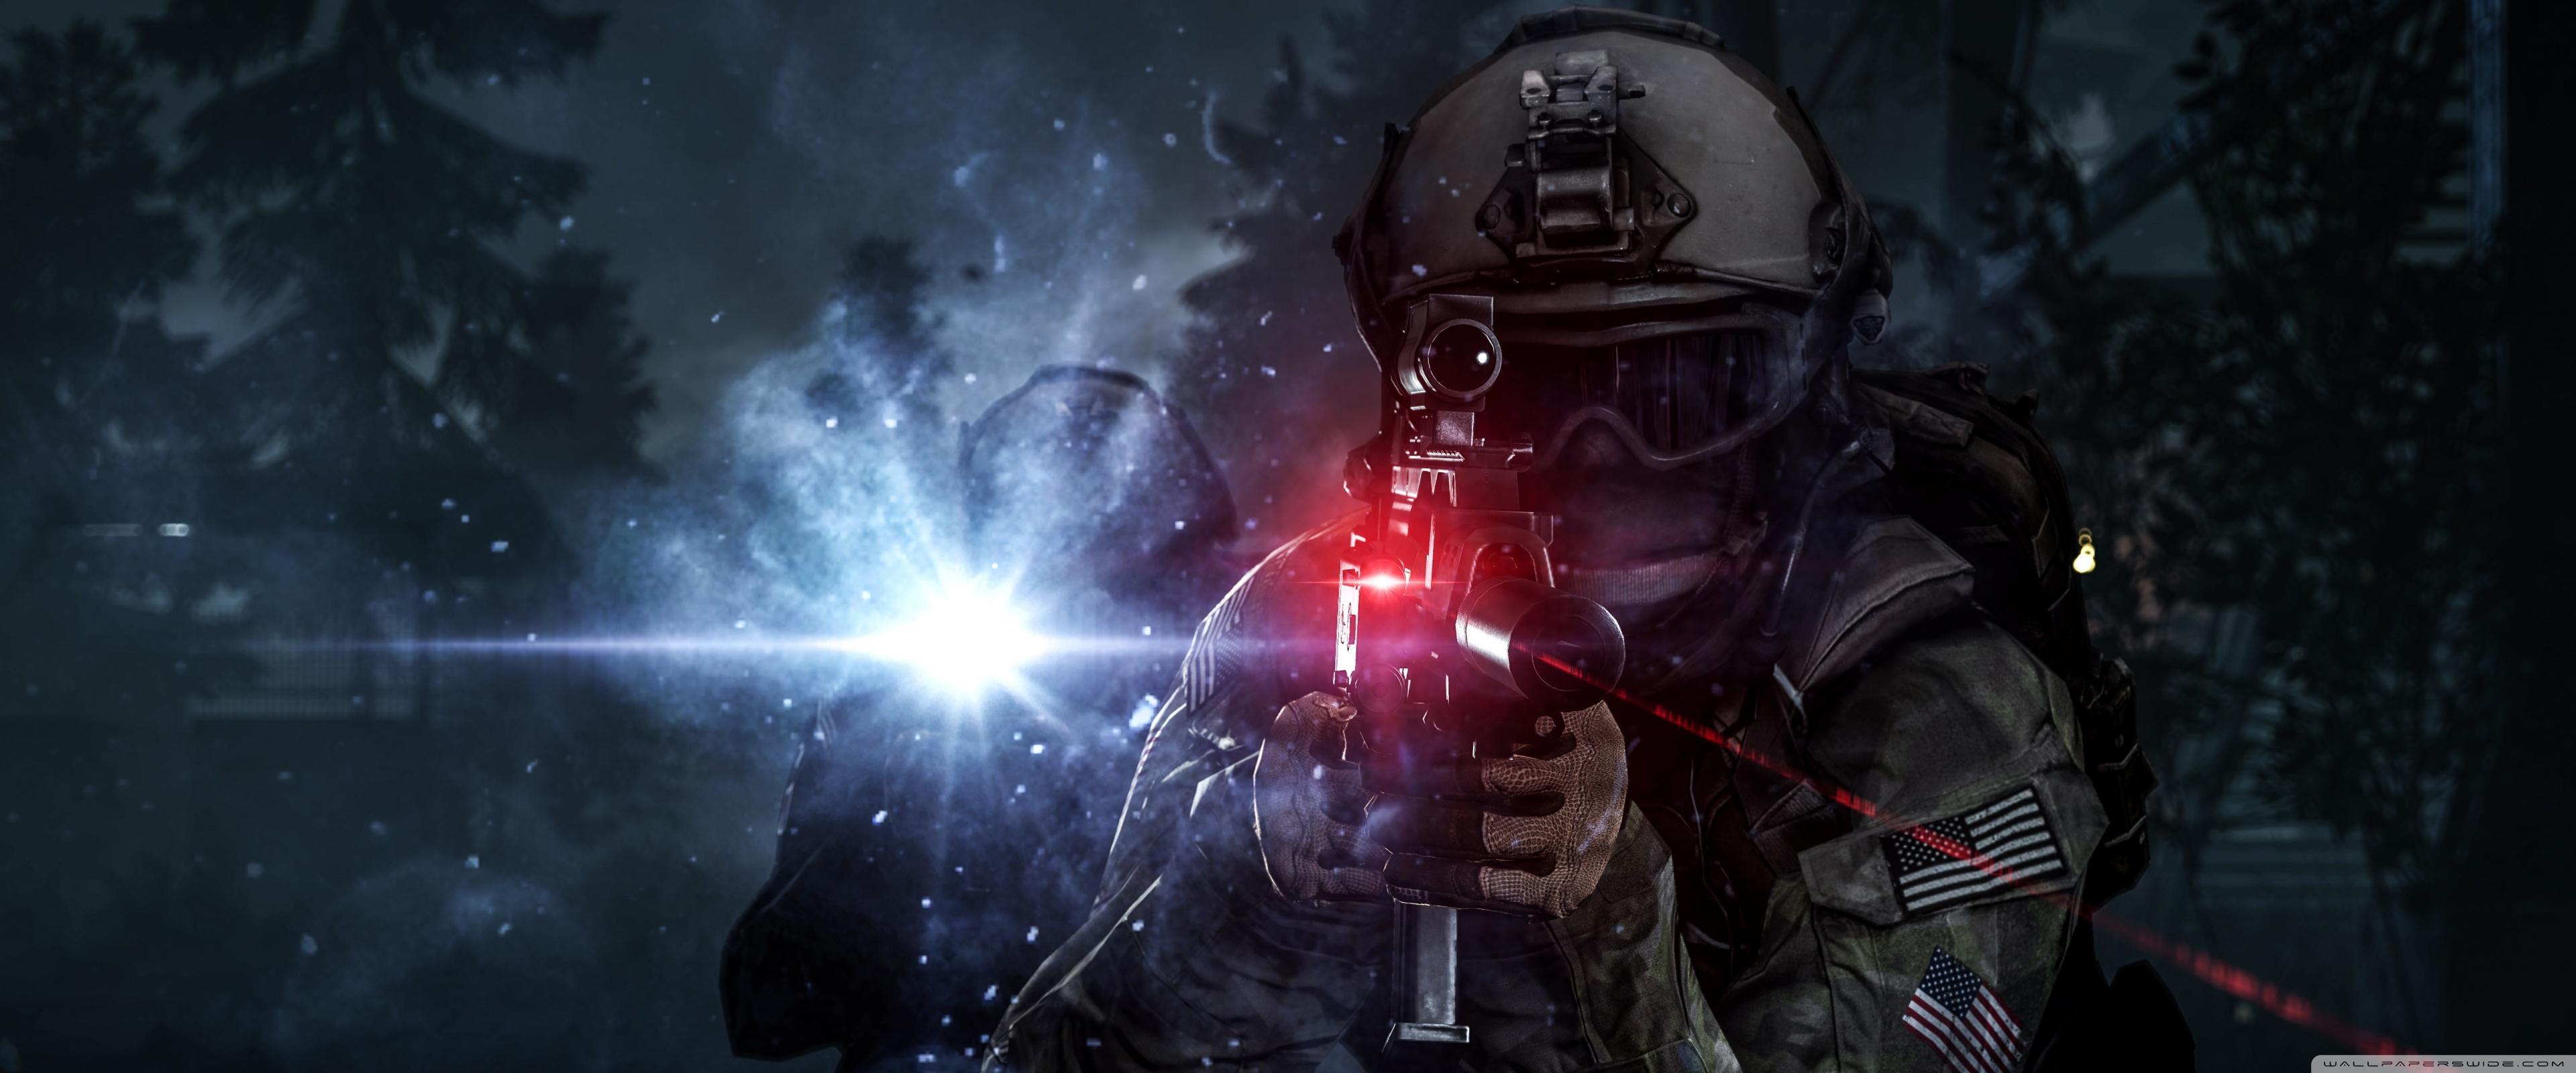 Battlefield 4 {EPIC TACTICAL PUSH!} HD Wallpapers